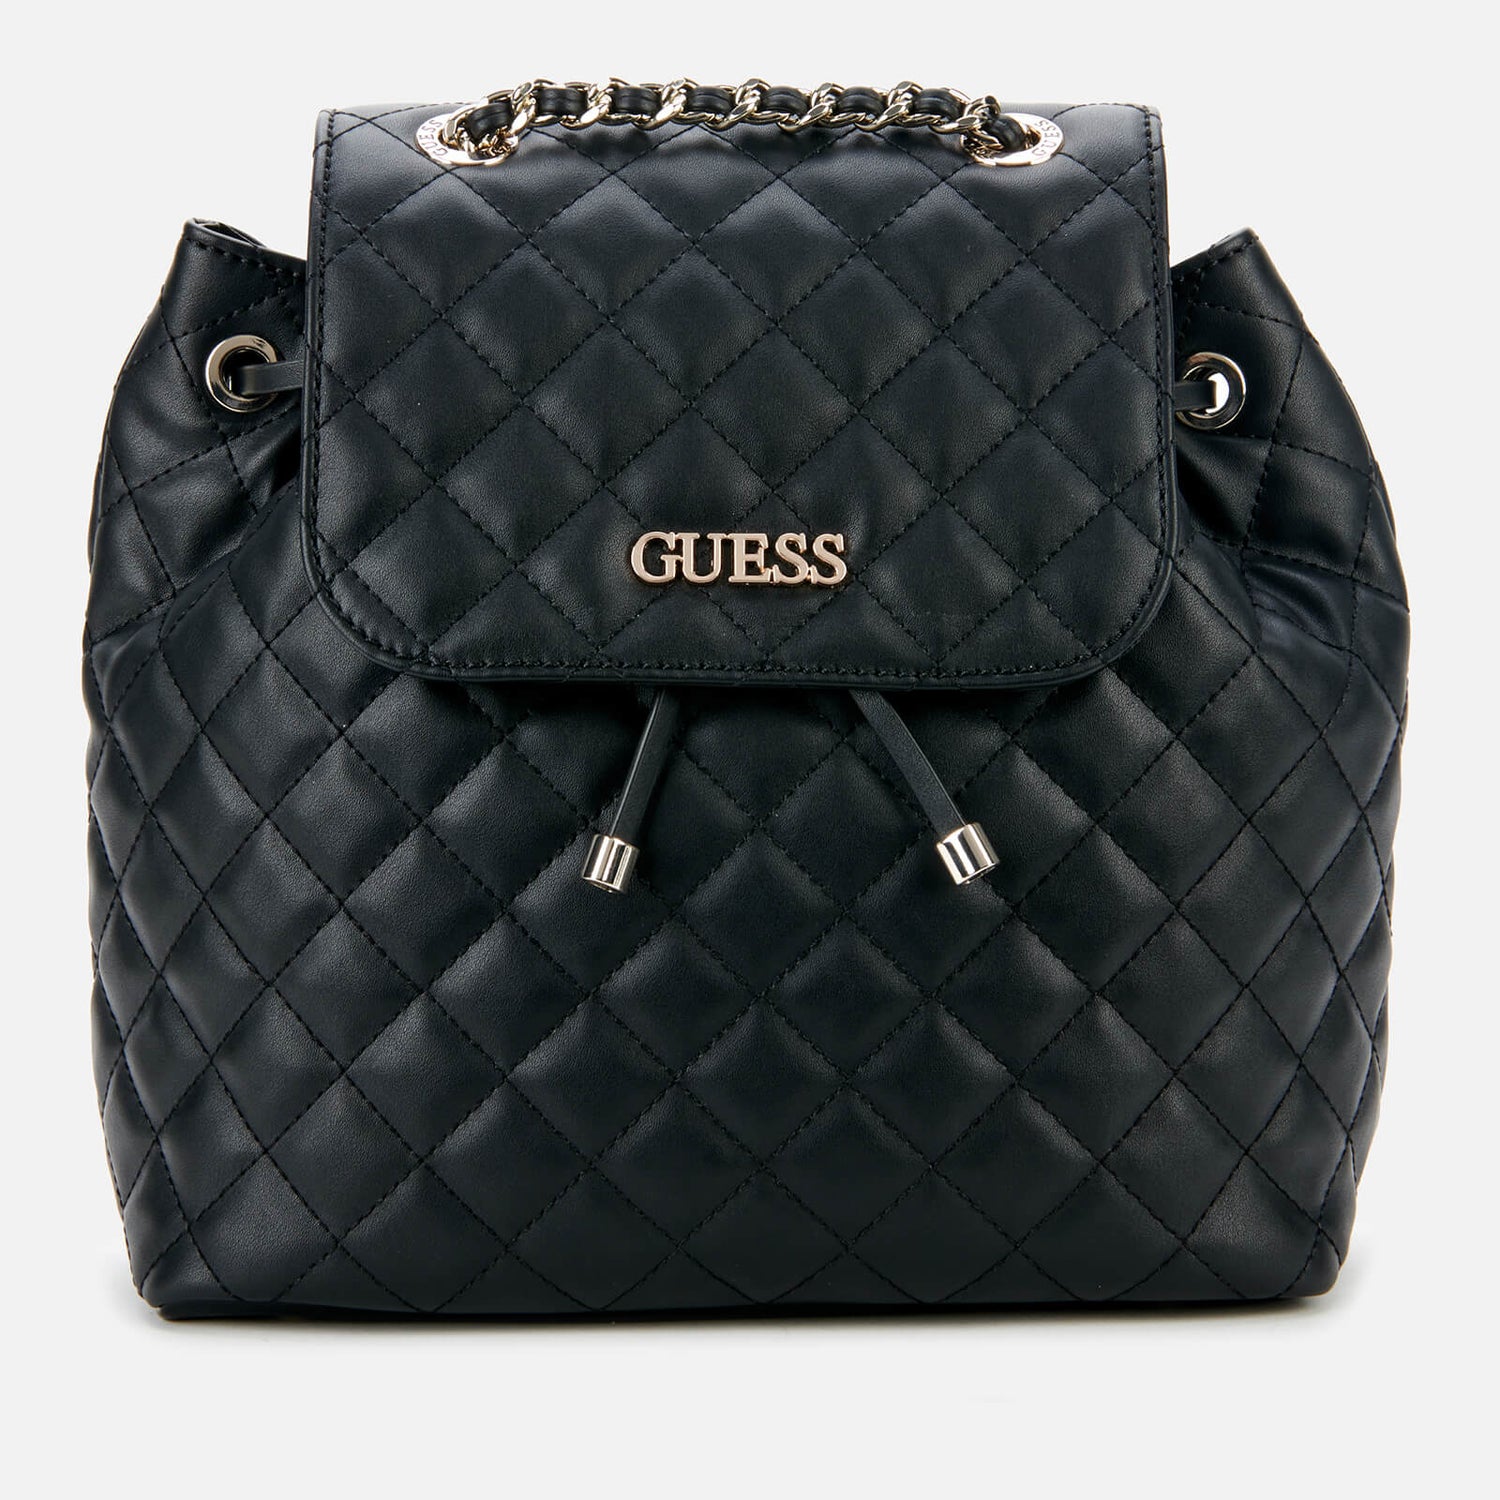 Guess Women's Illy Backpack - Black